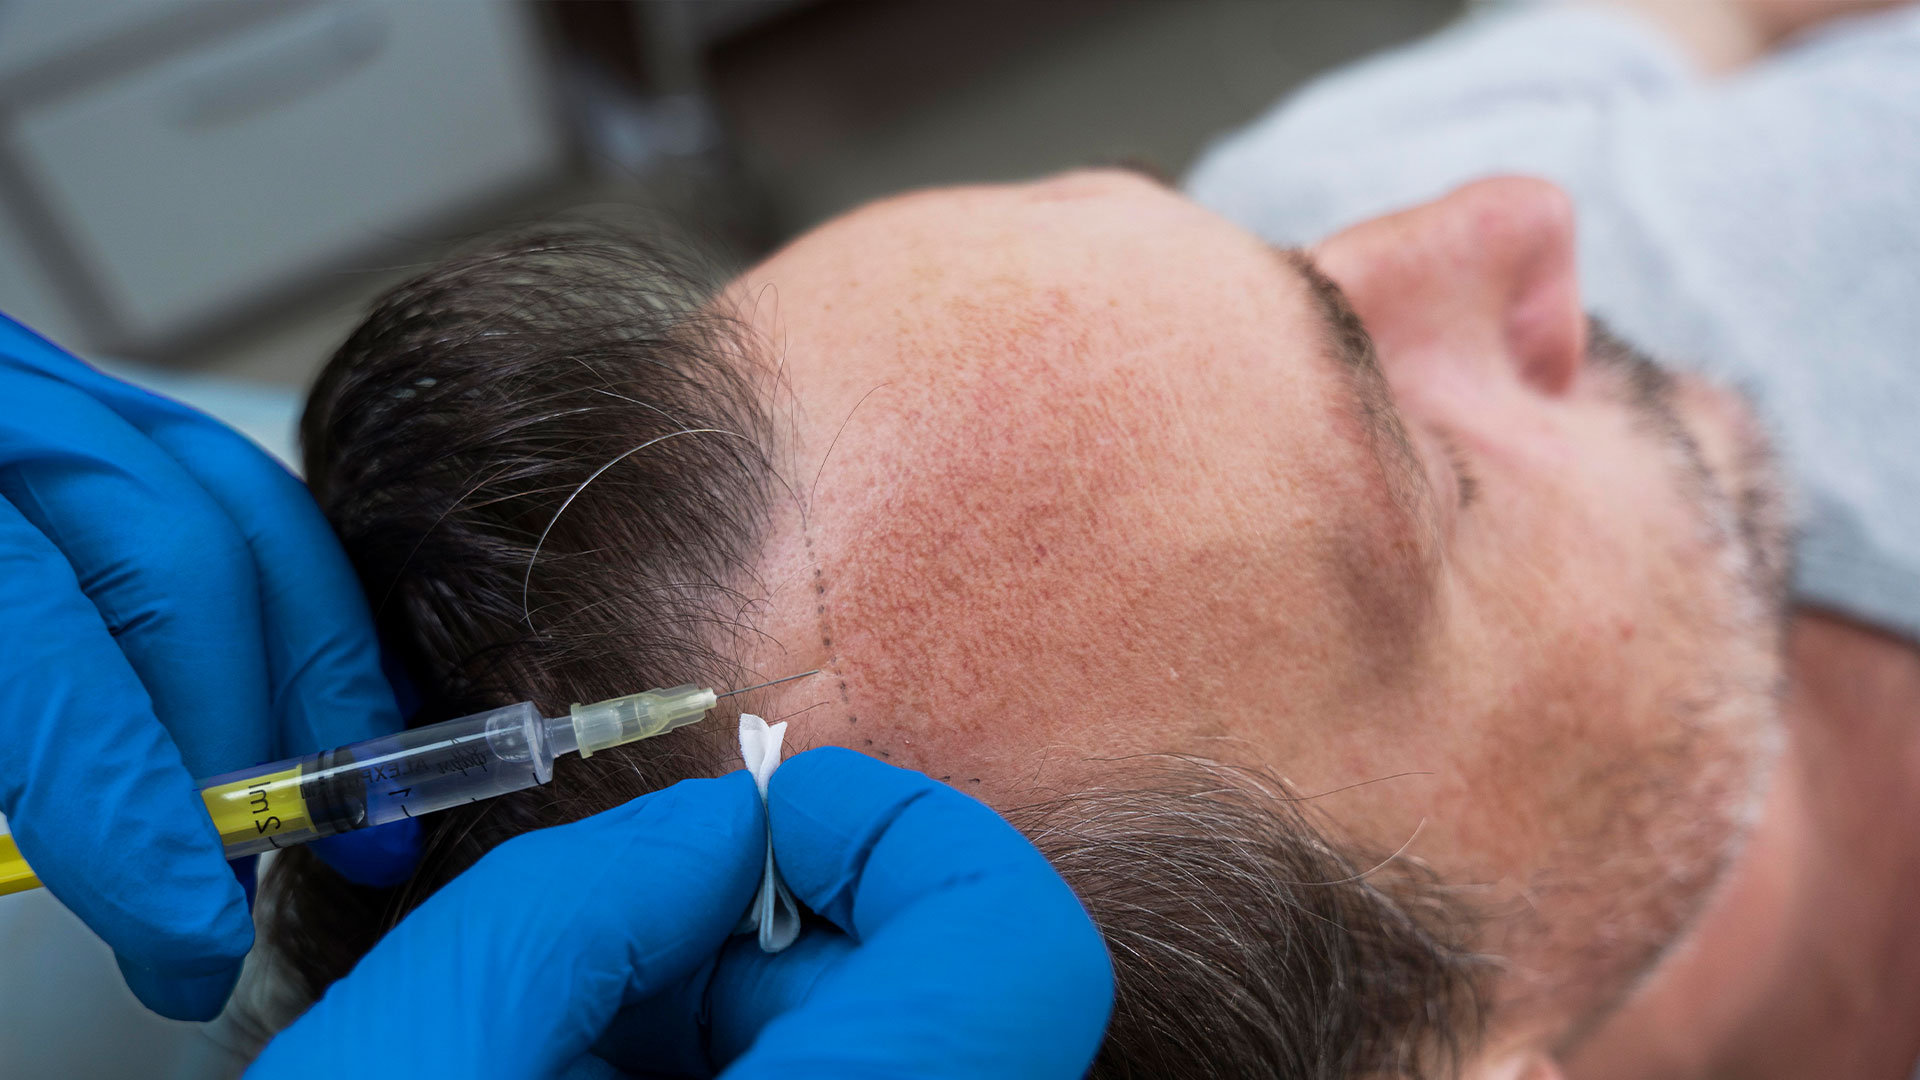 Hair Transplant in Delhi: Cost, Procedure, and Things to Consider